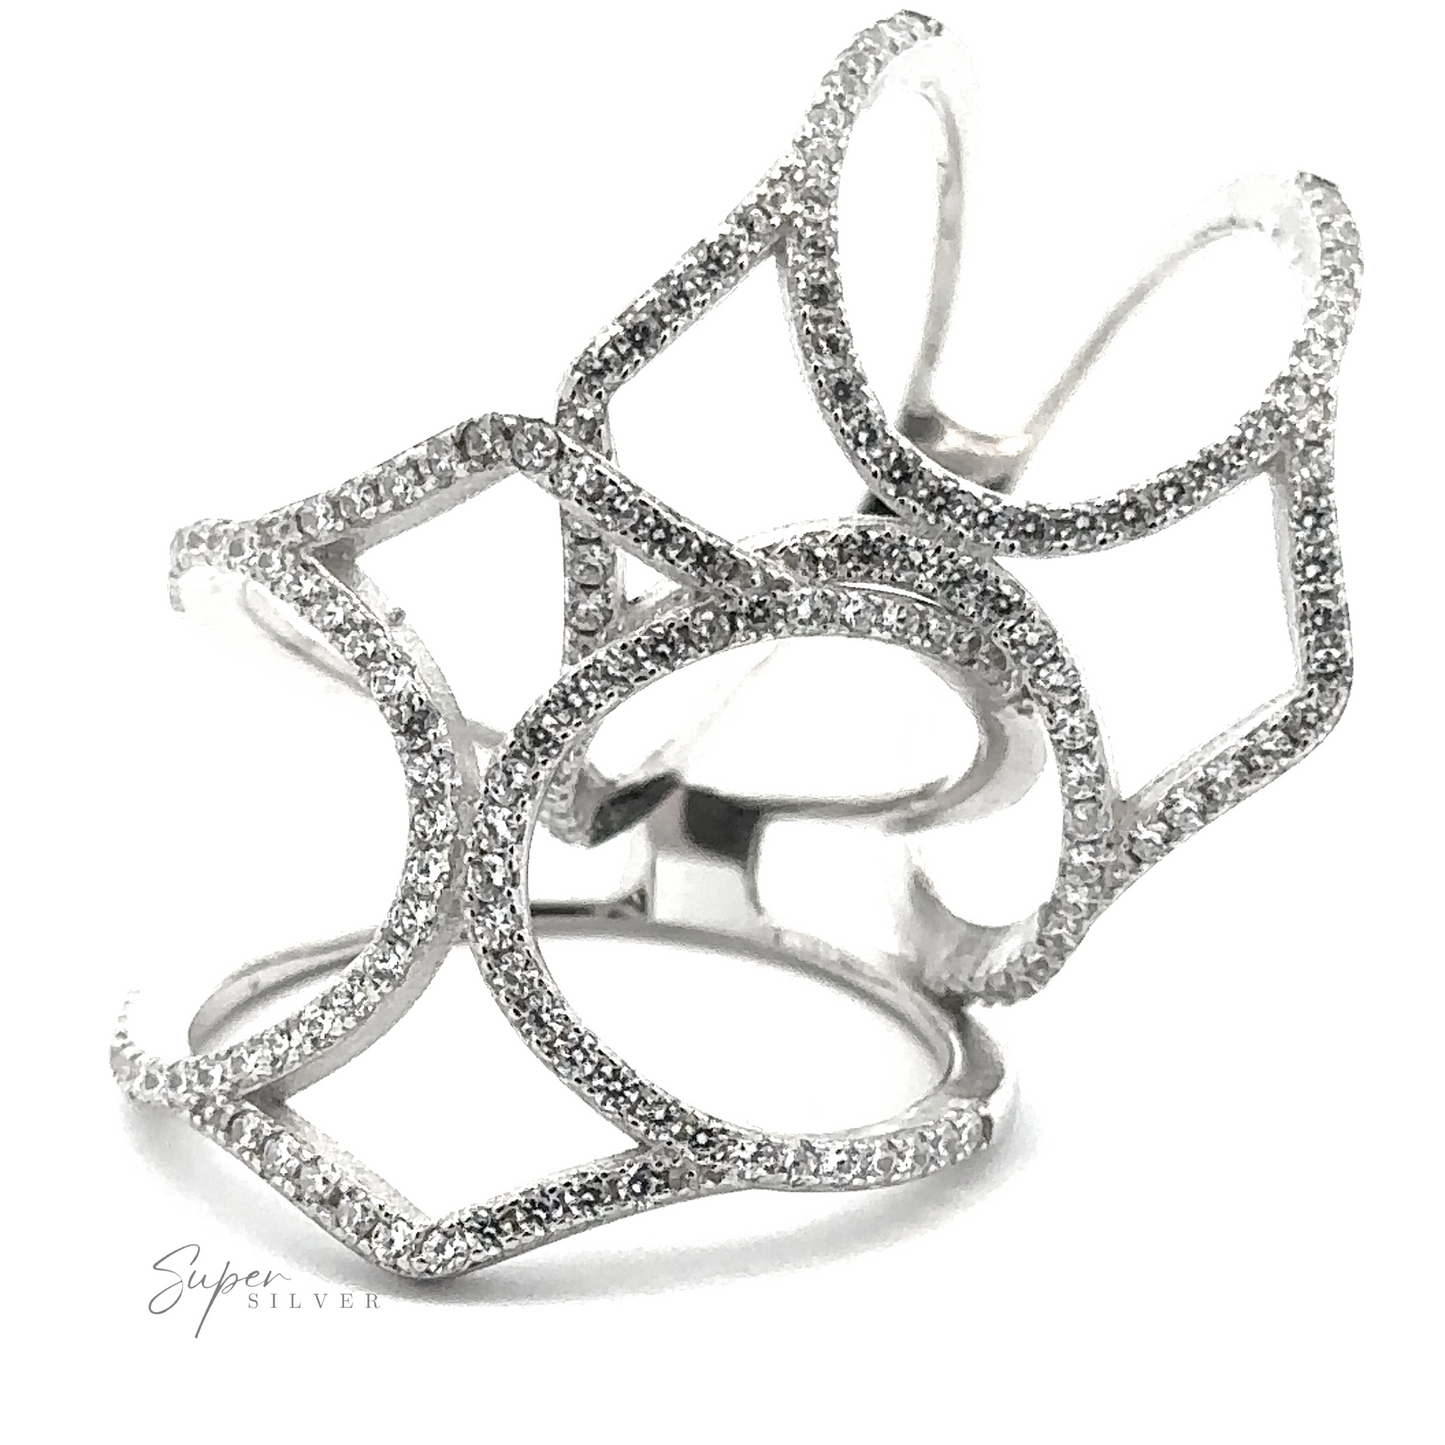 
                  
                    A Pavé Ring with Large Open Band with multiple interconnected geometric shapes and encrusted with small sparkling stones in a pavé setting. The "Super Silver" logo is visible at the bottom left.
                  
                